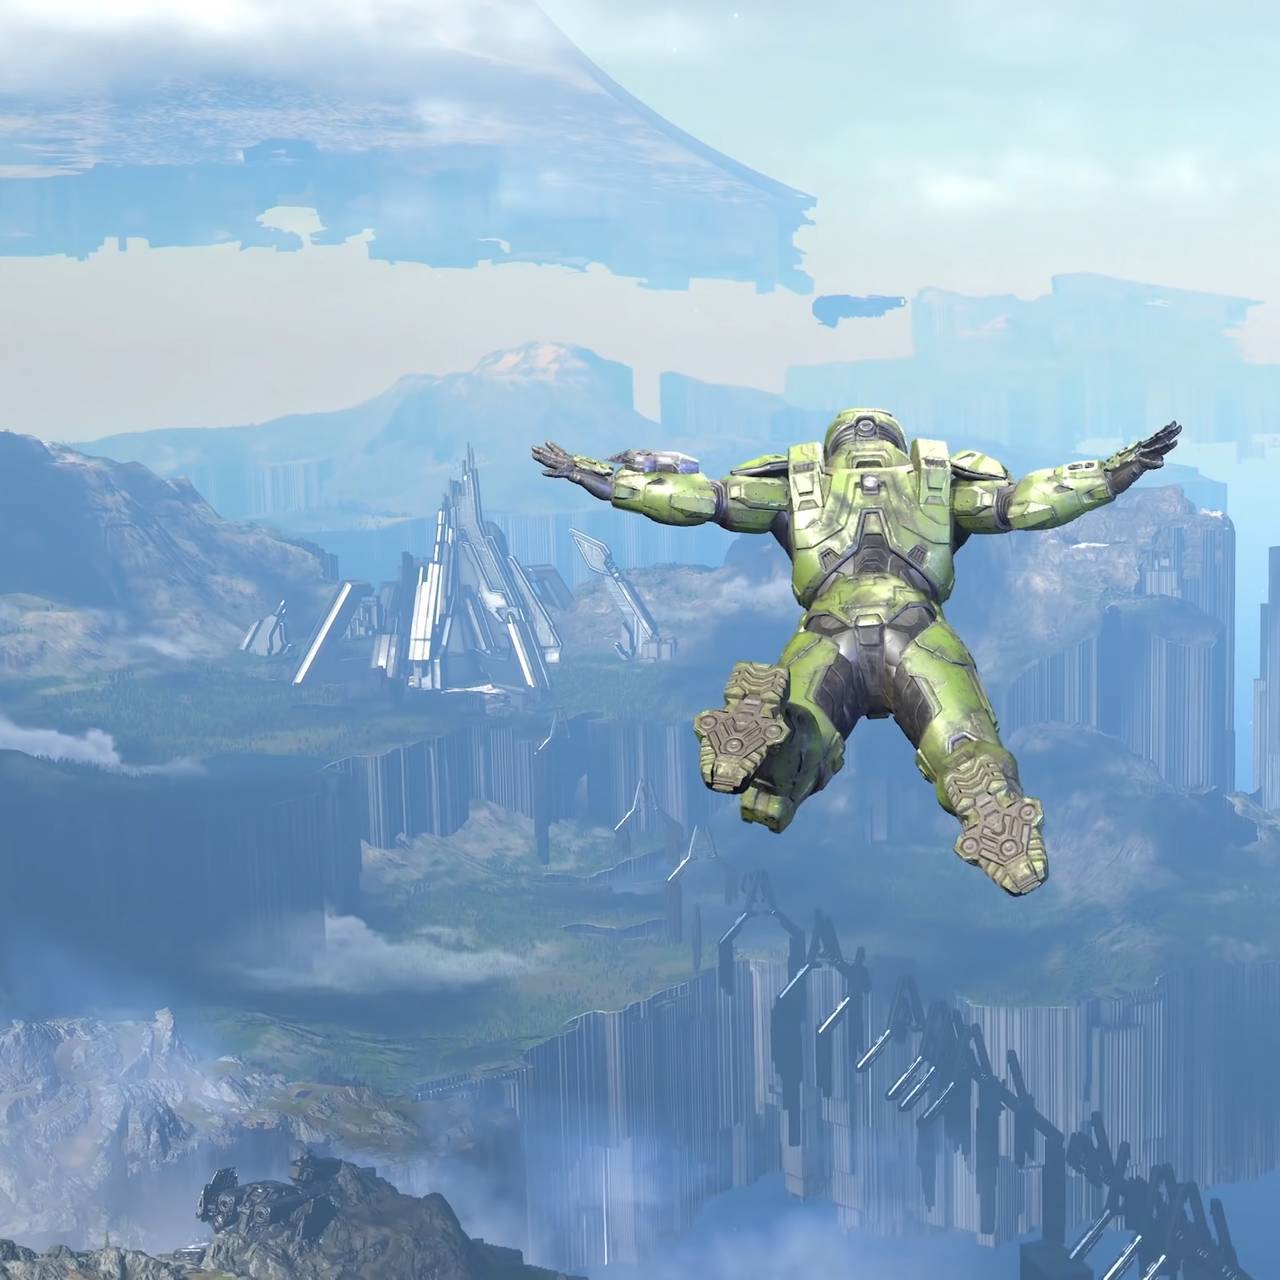 The Master Chief character is floating in the air in Halo Infinite.